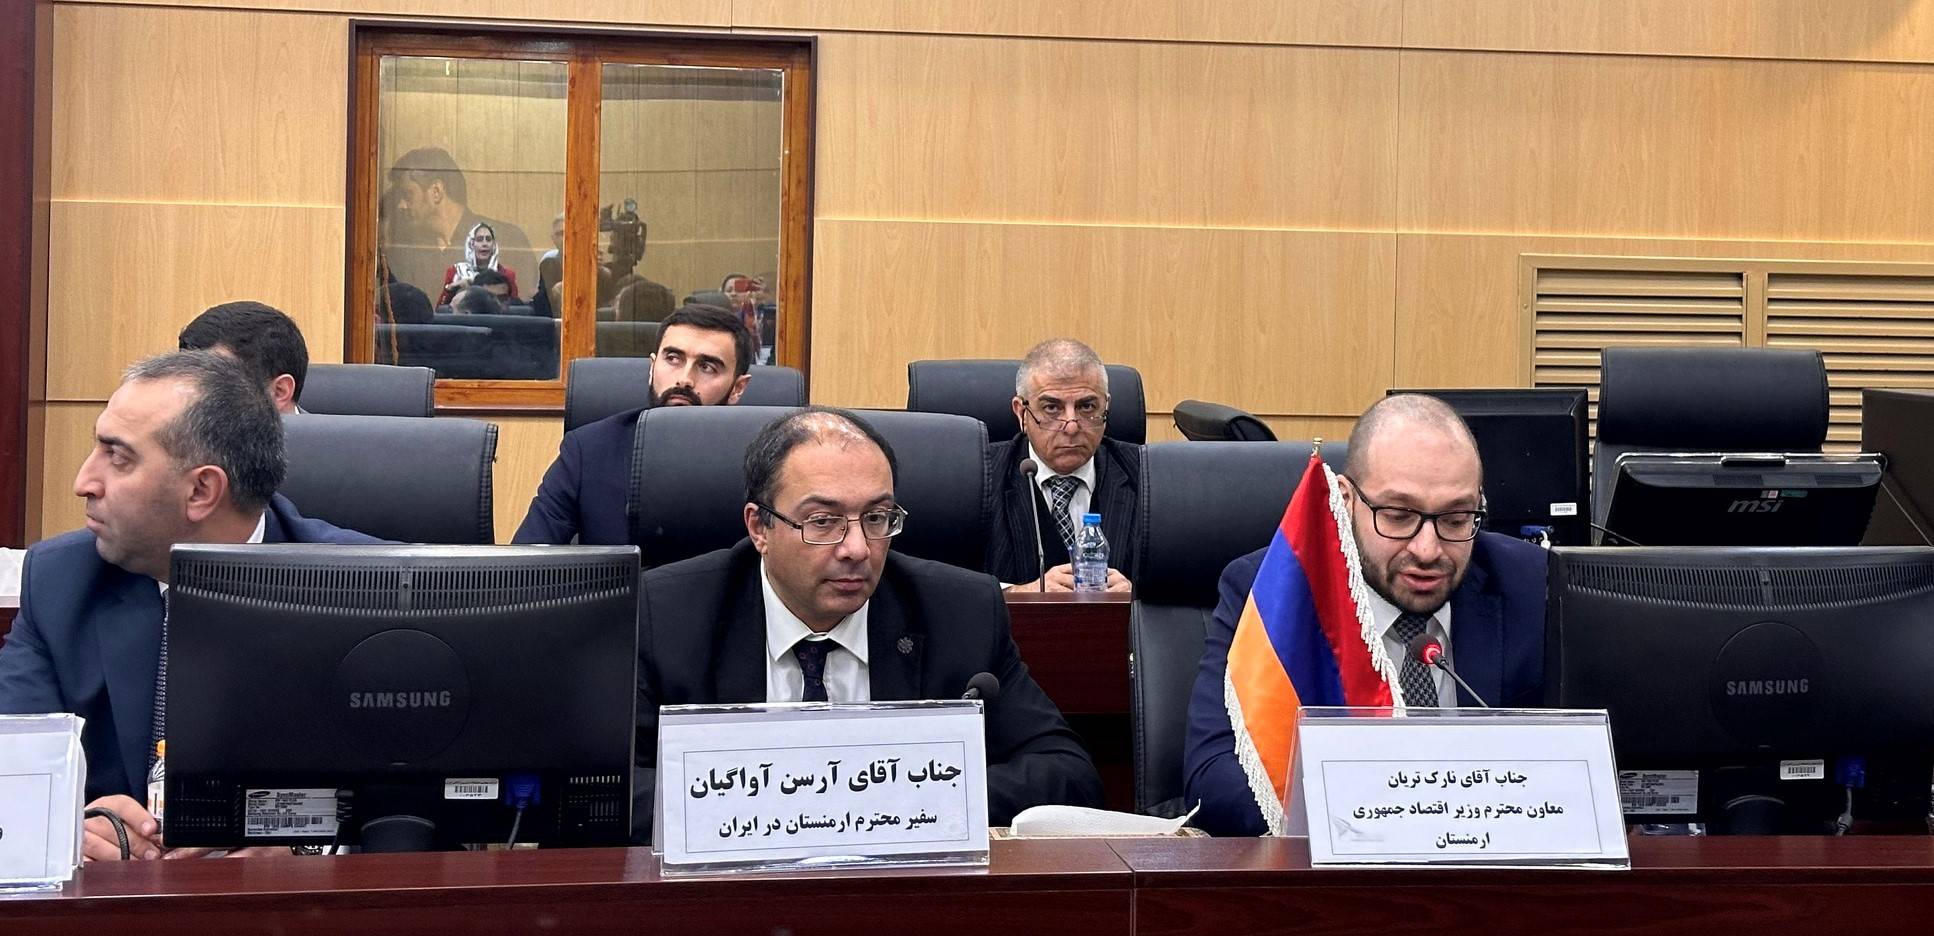 Armenian Deputy minister of Economy participated in Eurasian Forum for Trade and Economy - Tehran